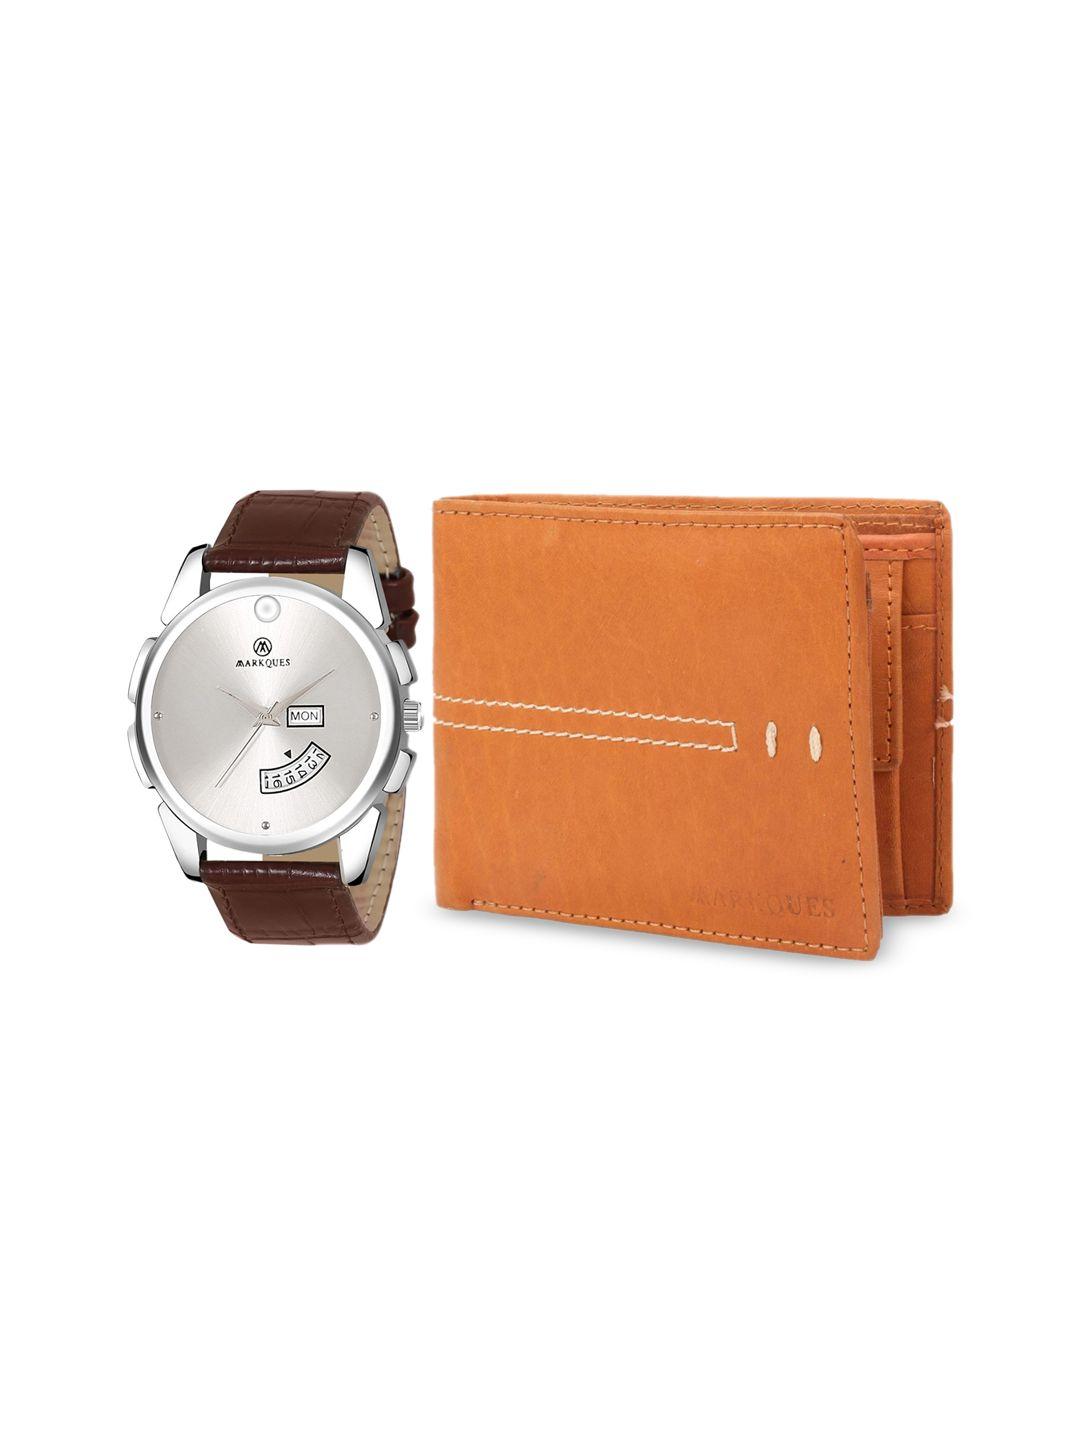 markques men multi analog watch and leather wallet combo accessory gift set